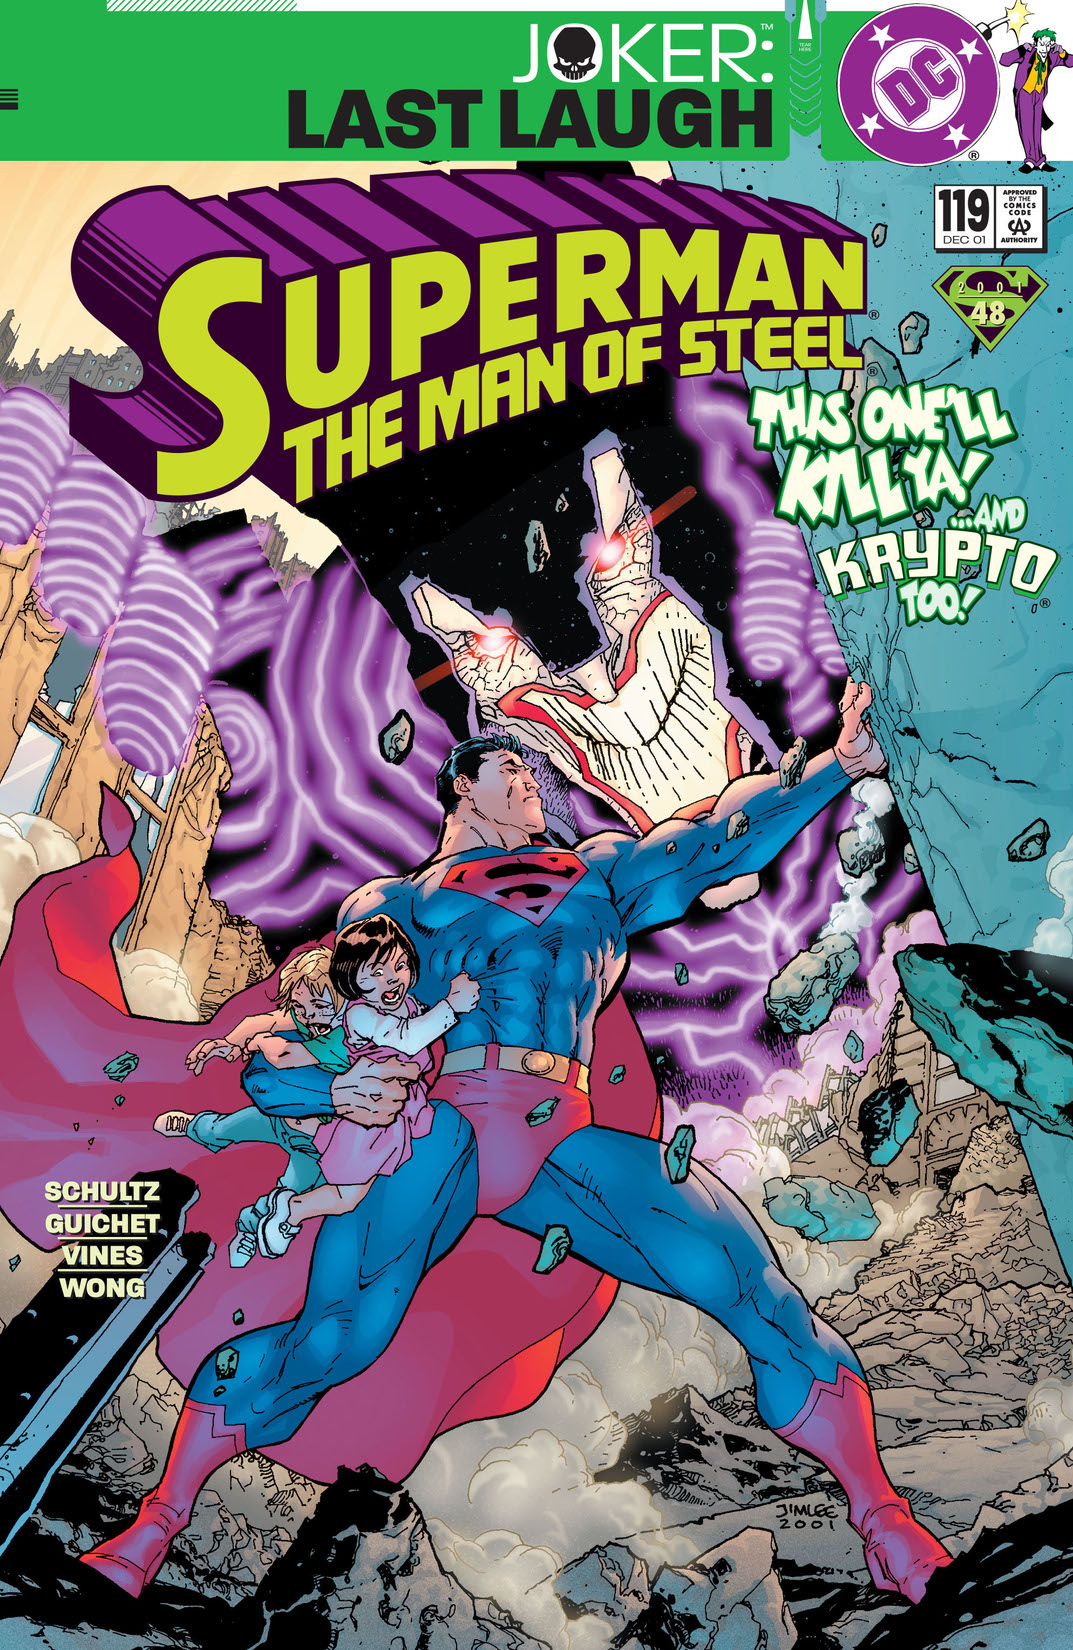 Superman: The Man of Steel #119 preview images